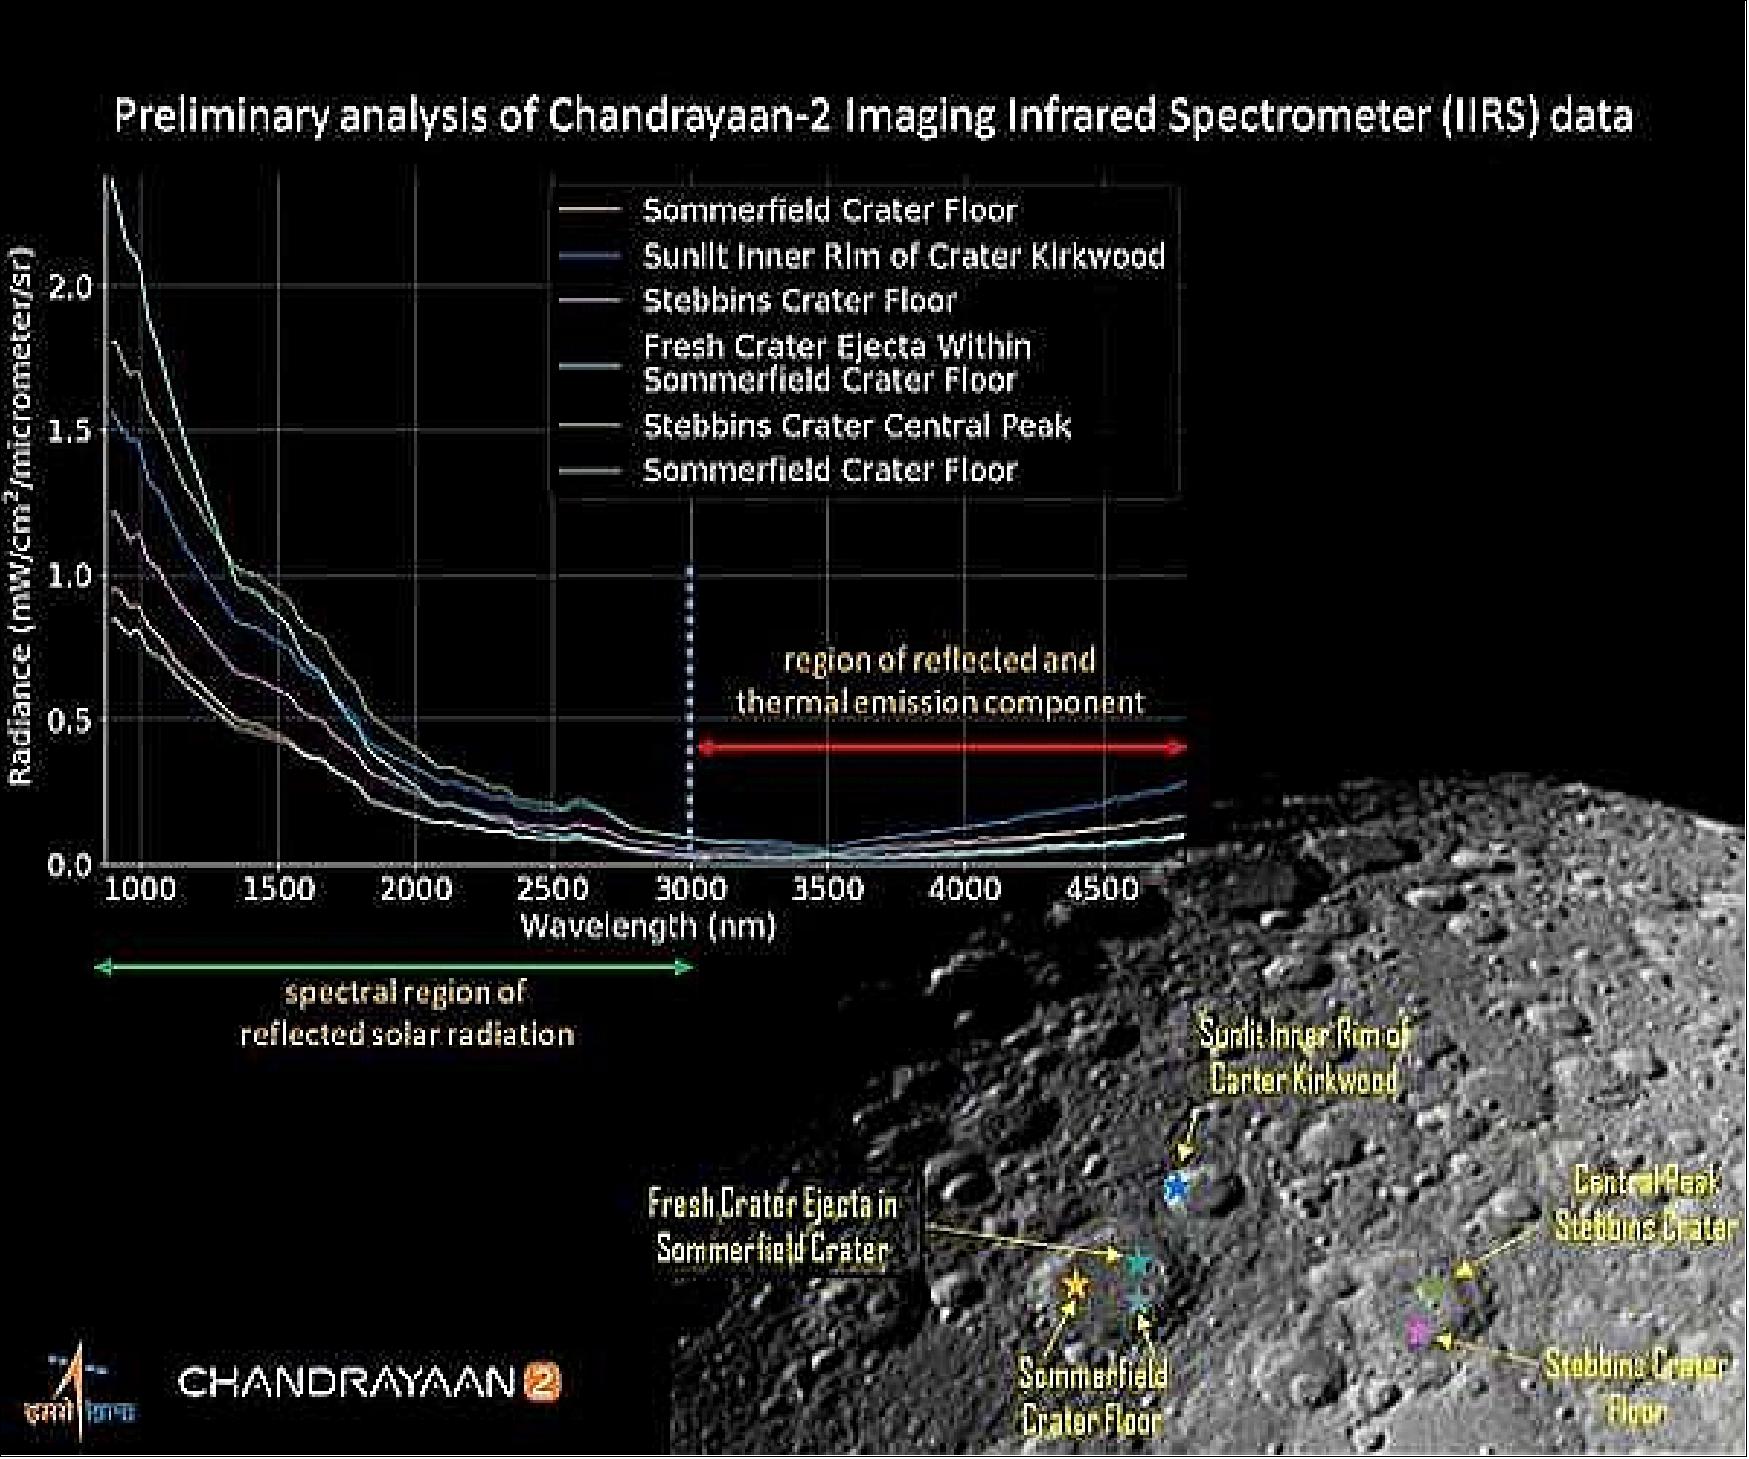 Figure 17: The IIRS instrument on-board Chandrayaan-2 measures the reflected sunlight and emitted part of the moonlight from the lunar surface in narrow spectral bands ranging from 0.8 - 5.0 µm (image credit: ISRO)